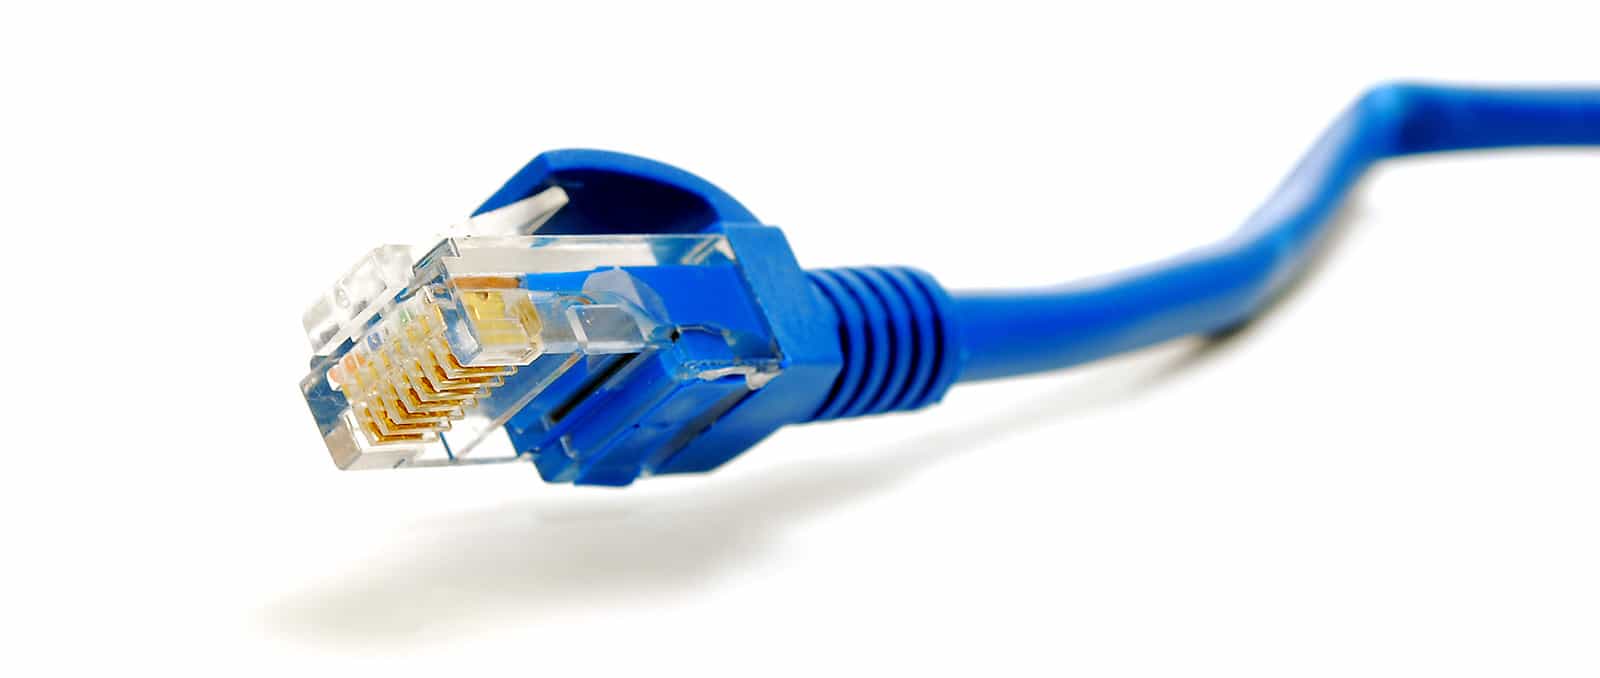 how to connect internet using lan cable